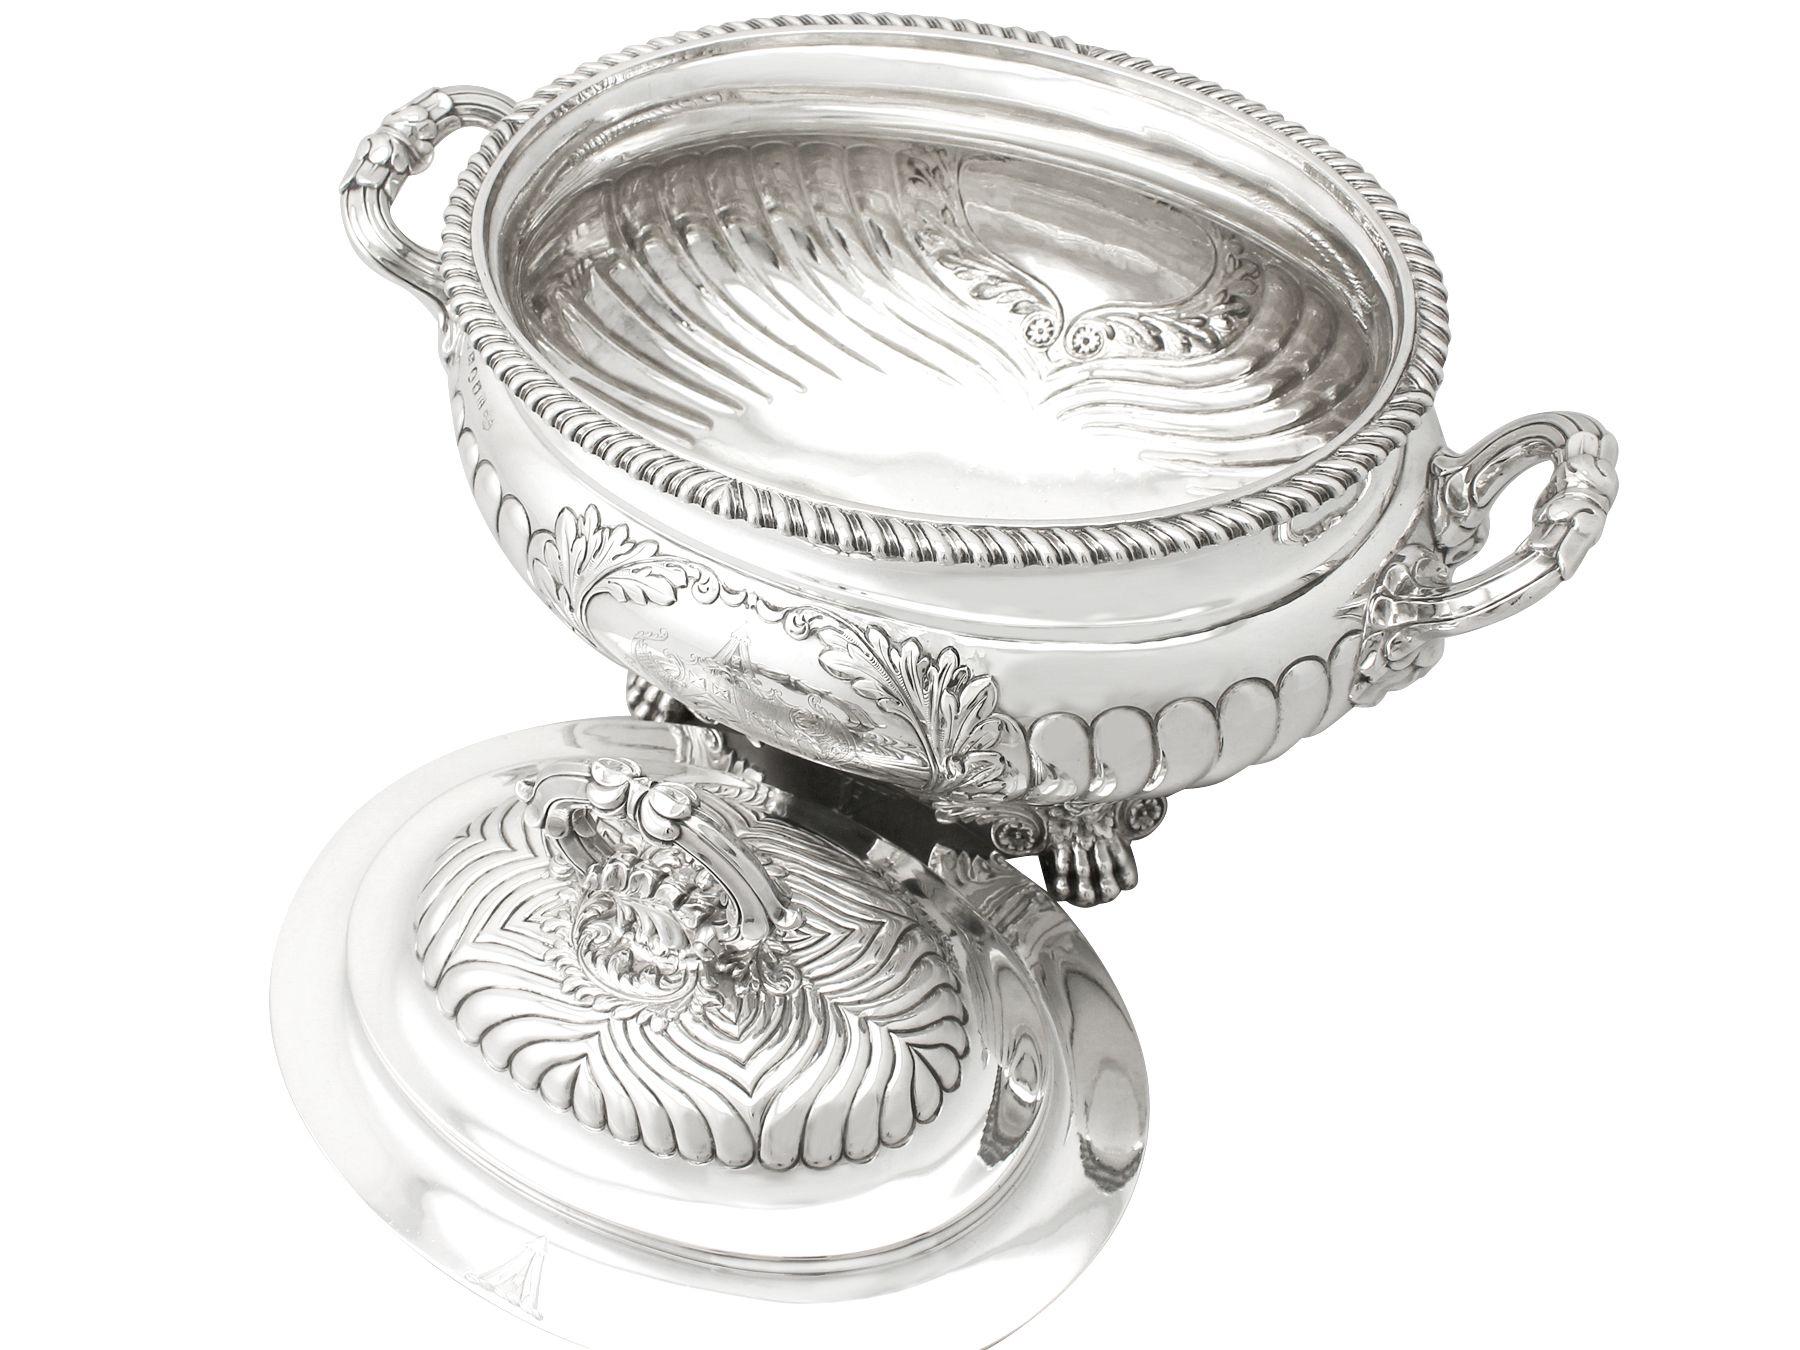 Antique Sterling Silver Soup Tureen or Centerpiece In Excellent Condition For Sale In Jesmond, Newcastle Upon Tyne